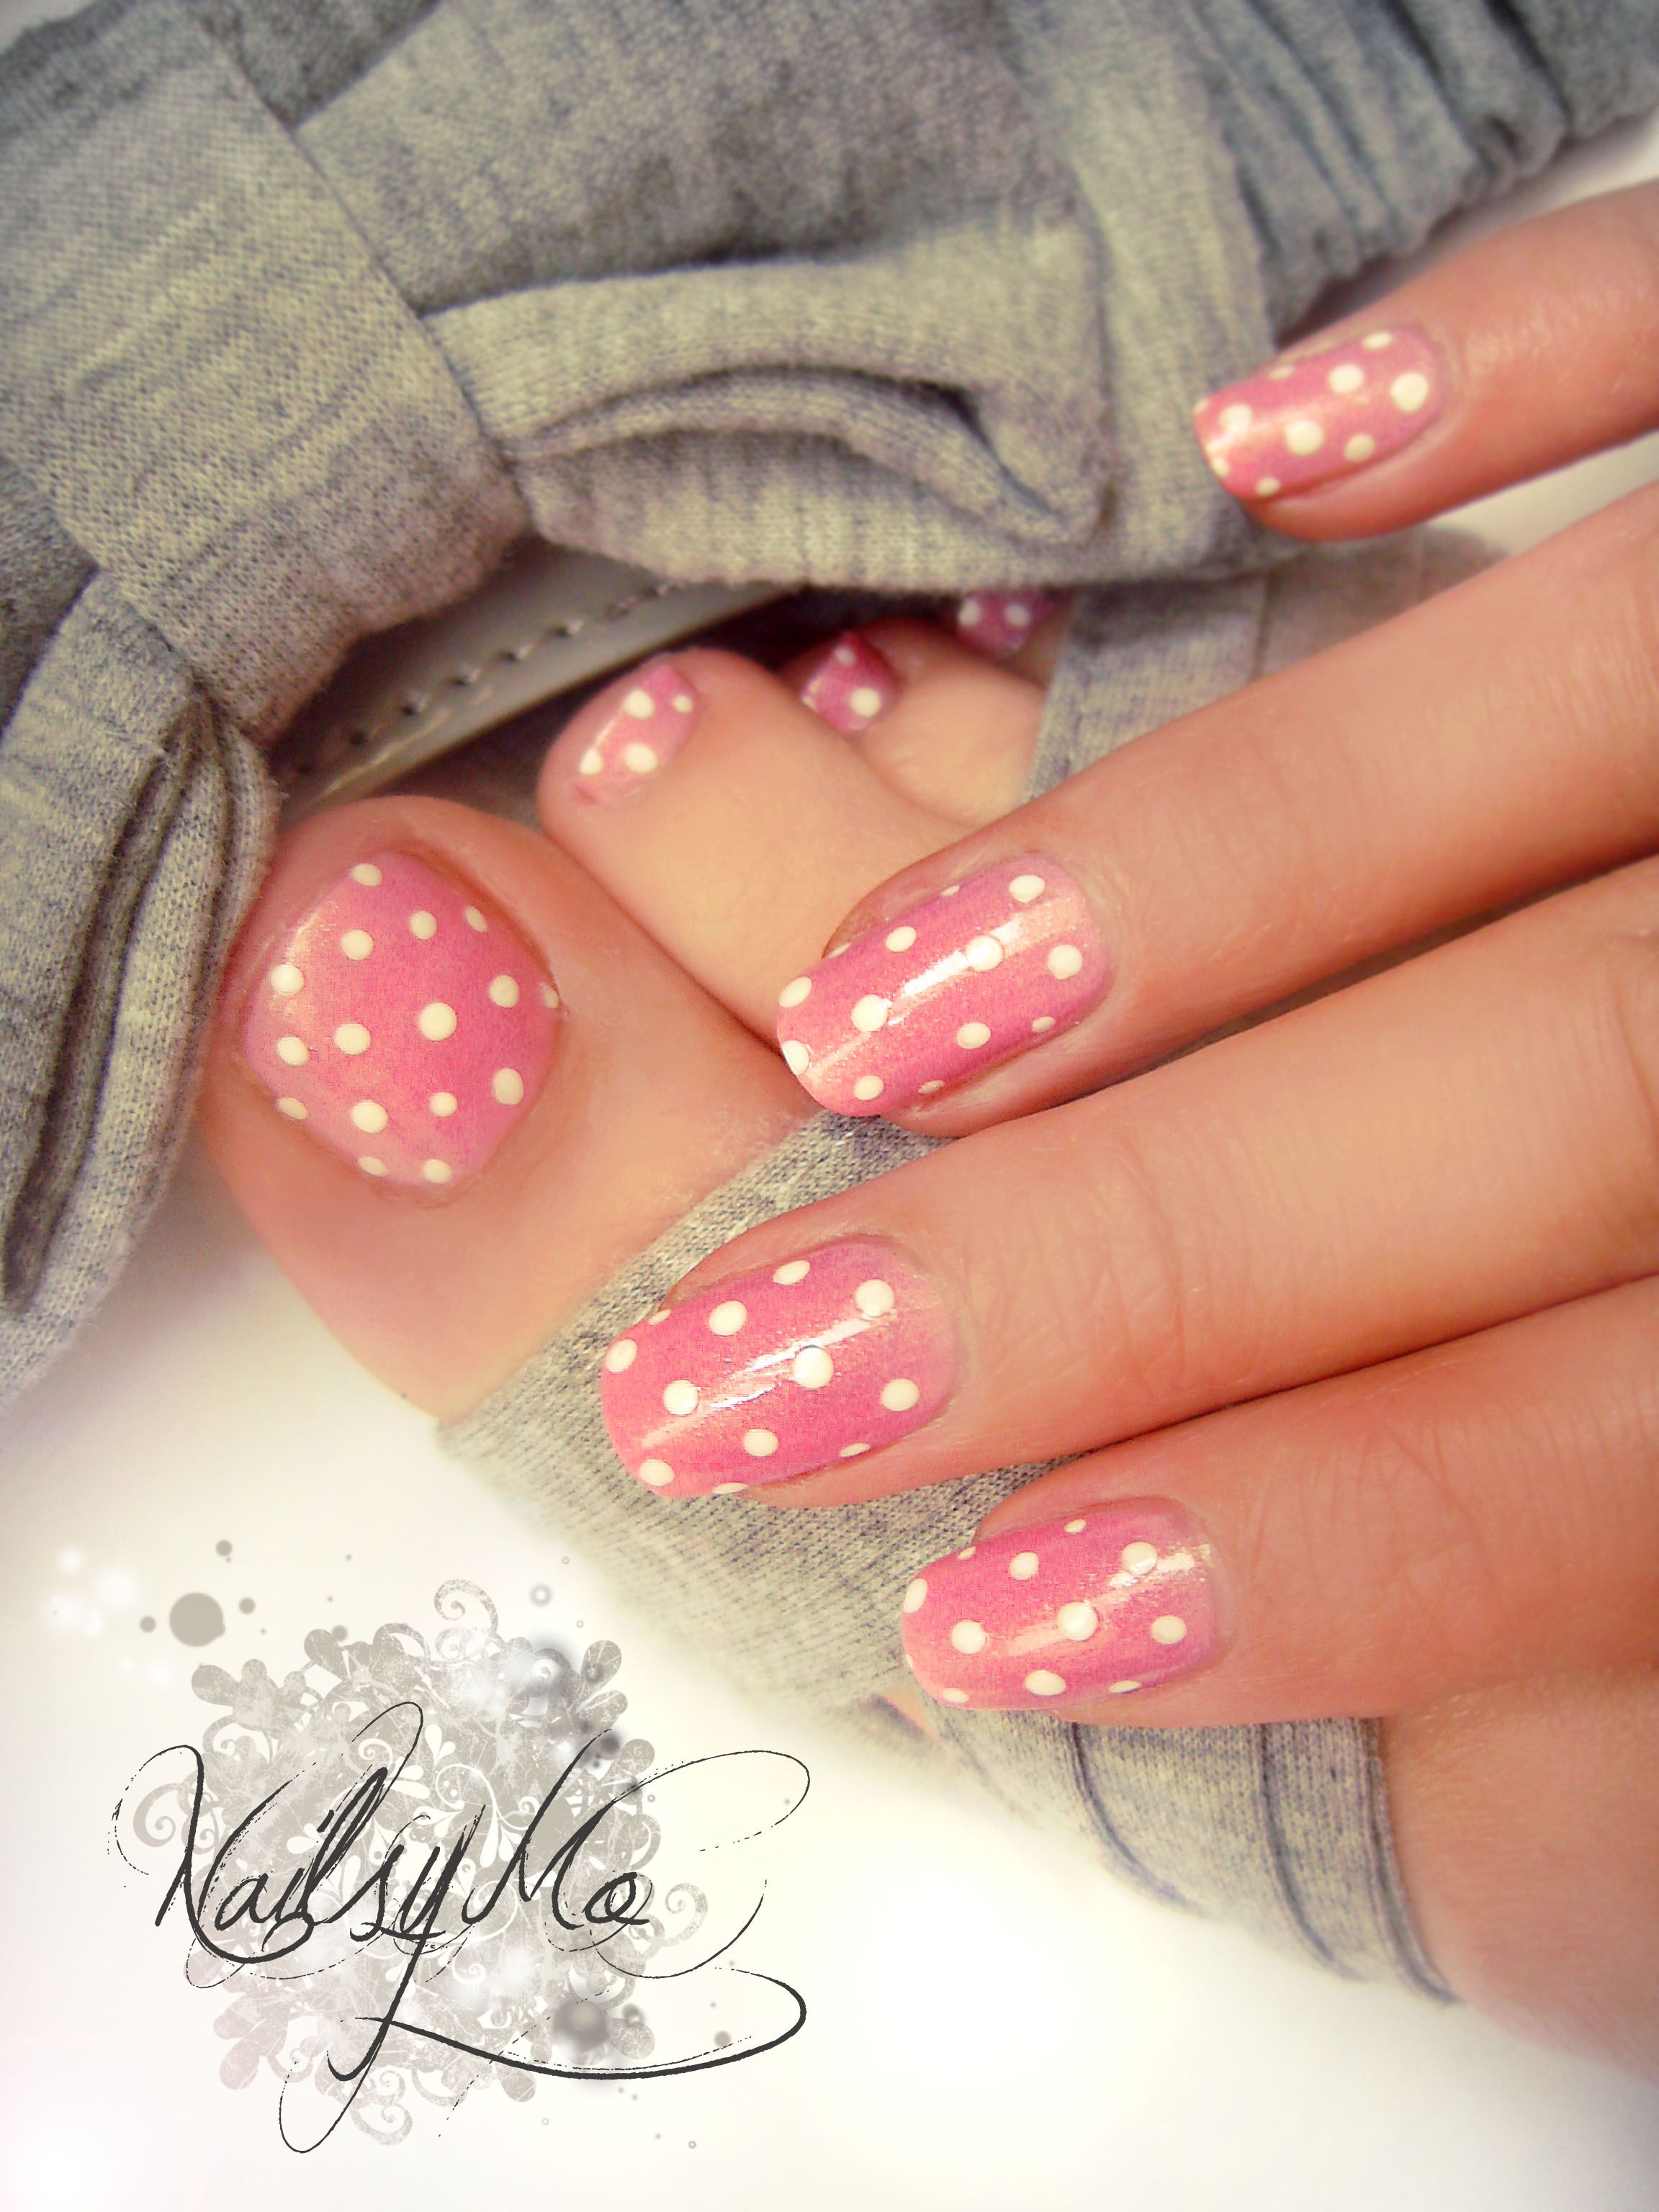 simply and girly, love it!